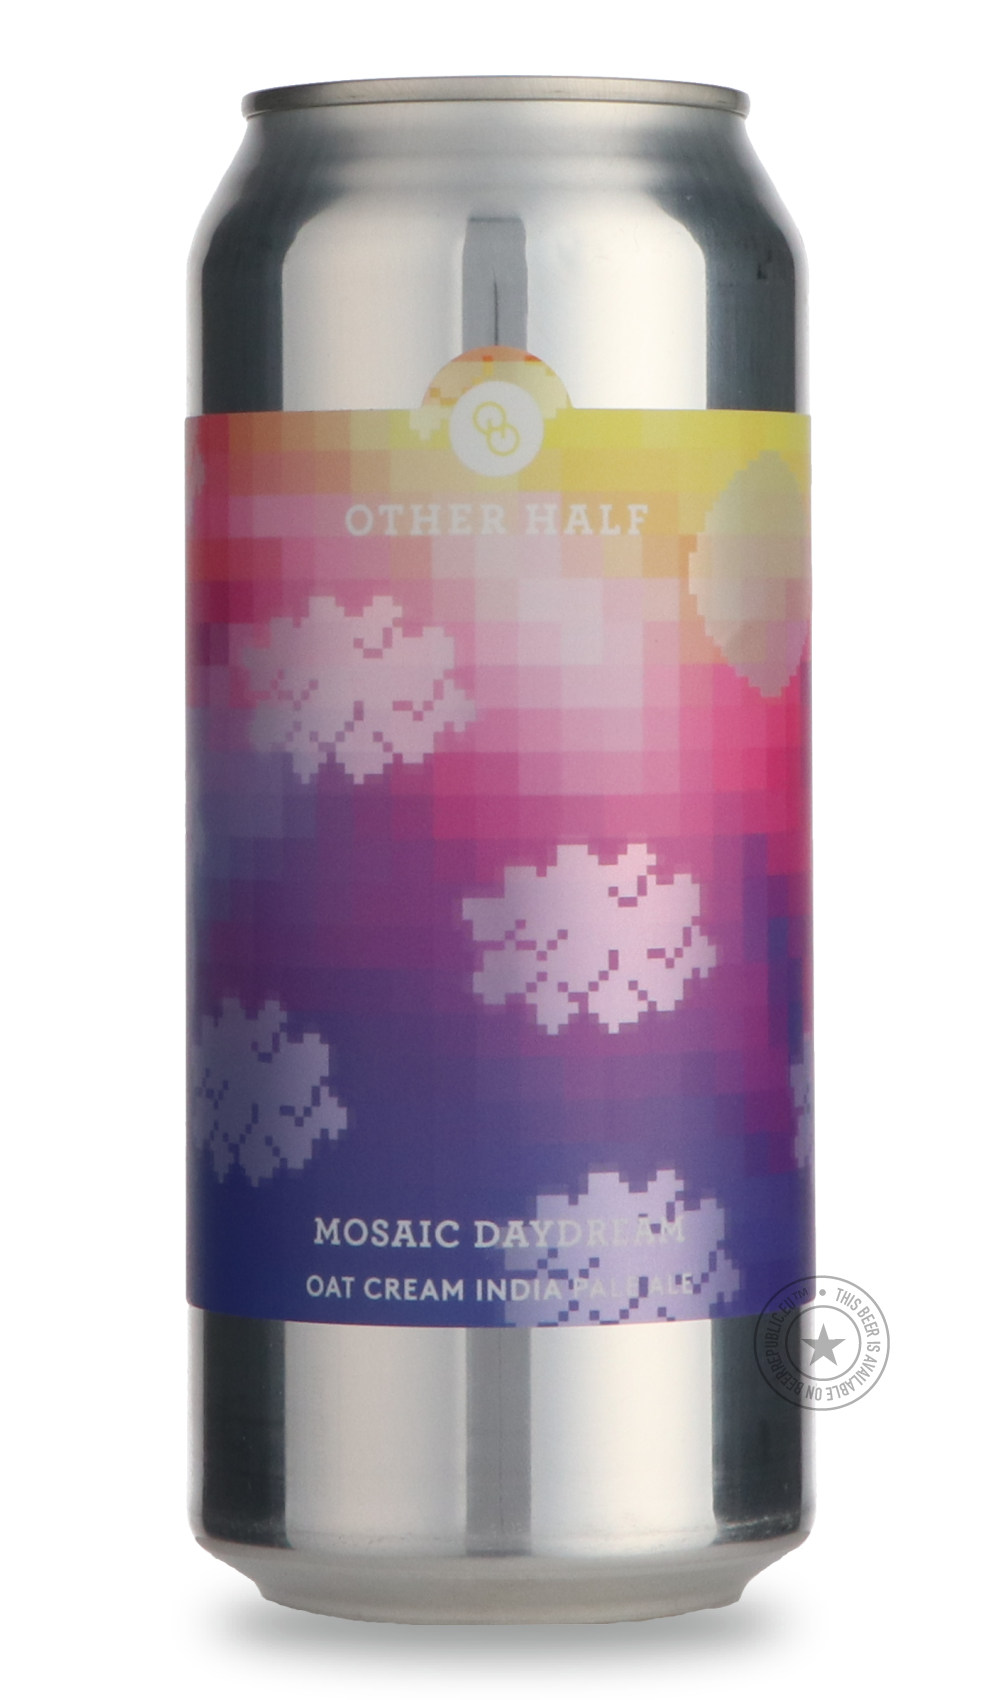 -Other Half- Mosaic Daydream-IPA- Only @ Beer Republic - The best online beer store for American & Canadian craft beer - Buy beer online from the USA and Canada - Bier online kopen - Amerikaans bier kopen - Craft beer store - Craft beer kopen - Amerikanisch bier kaufen - Bier online kaufen - Acheter biere online - IPA - Stout - Porter - New England IPA - Hazy IPA - Imperial Stout - Barrel Aged - Barrel Aged Imperial Stout - Brown - Dark beer - Blond - Blonde - Pilsner - Lager - Wheat - Weizen - Amber - Barl